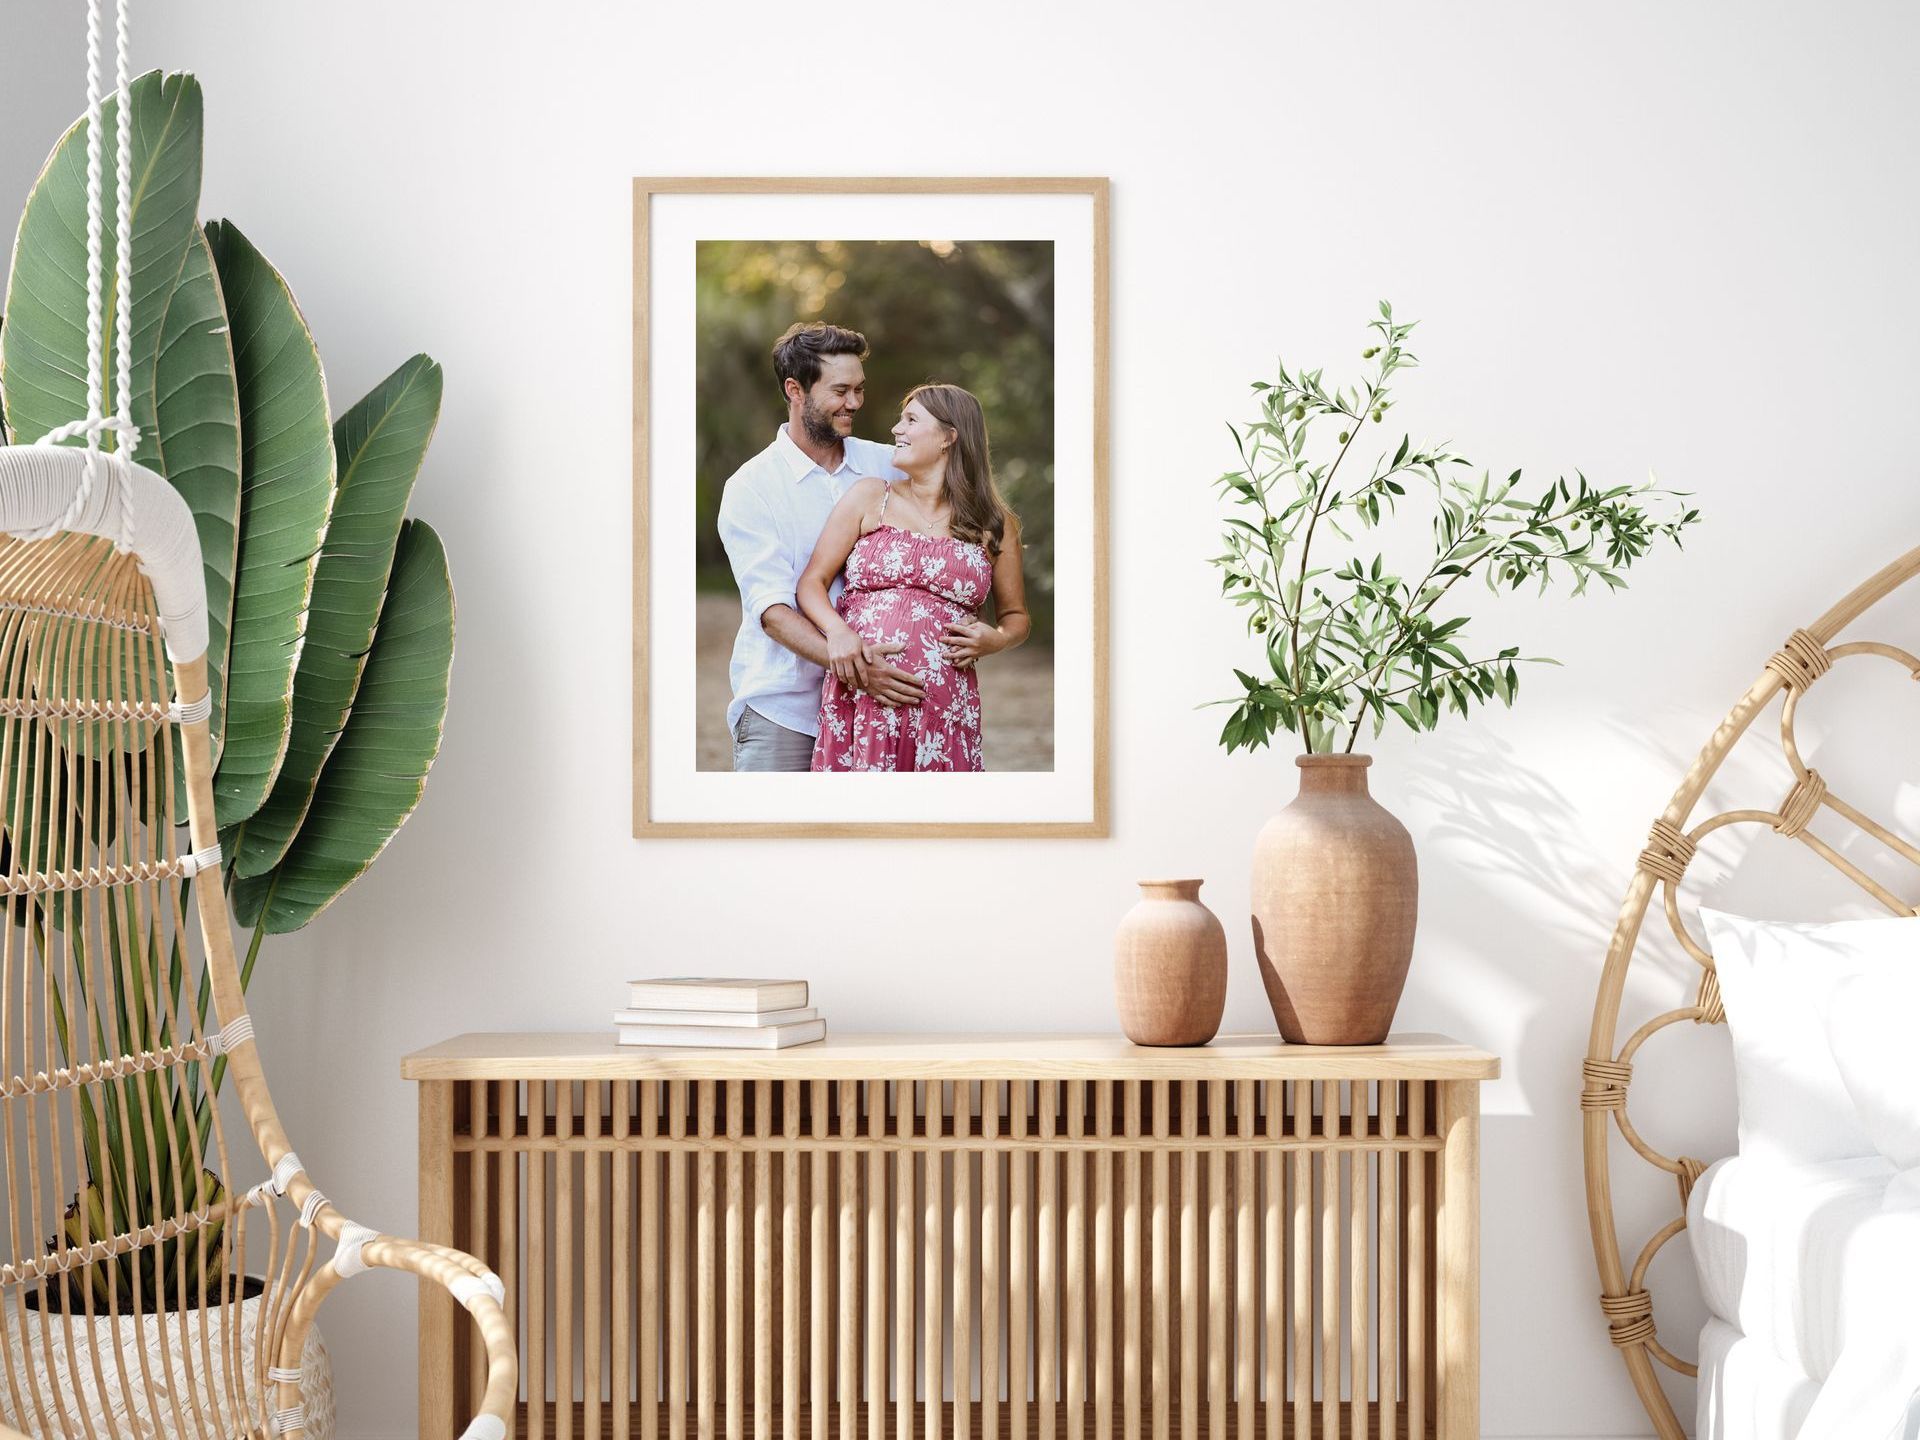 Maternity portrait framed and hanging on the wall in a bright sunny bedroom